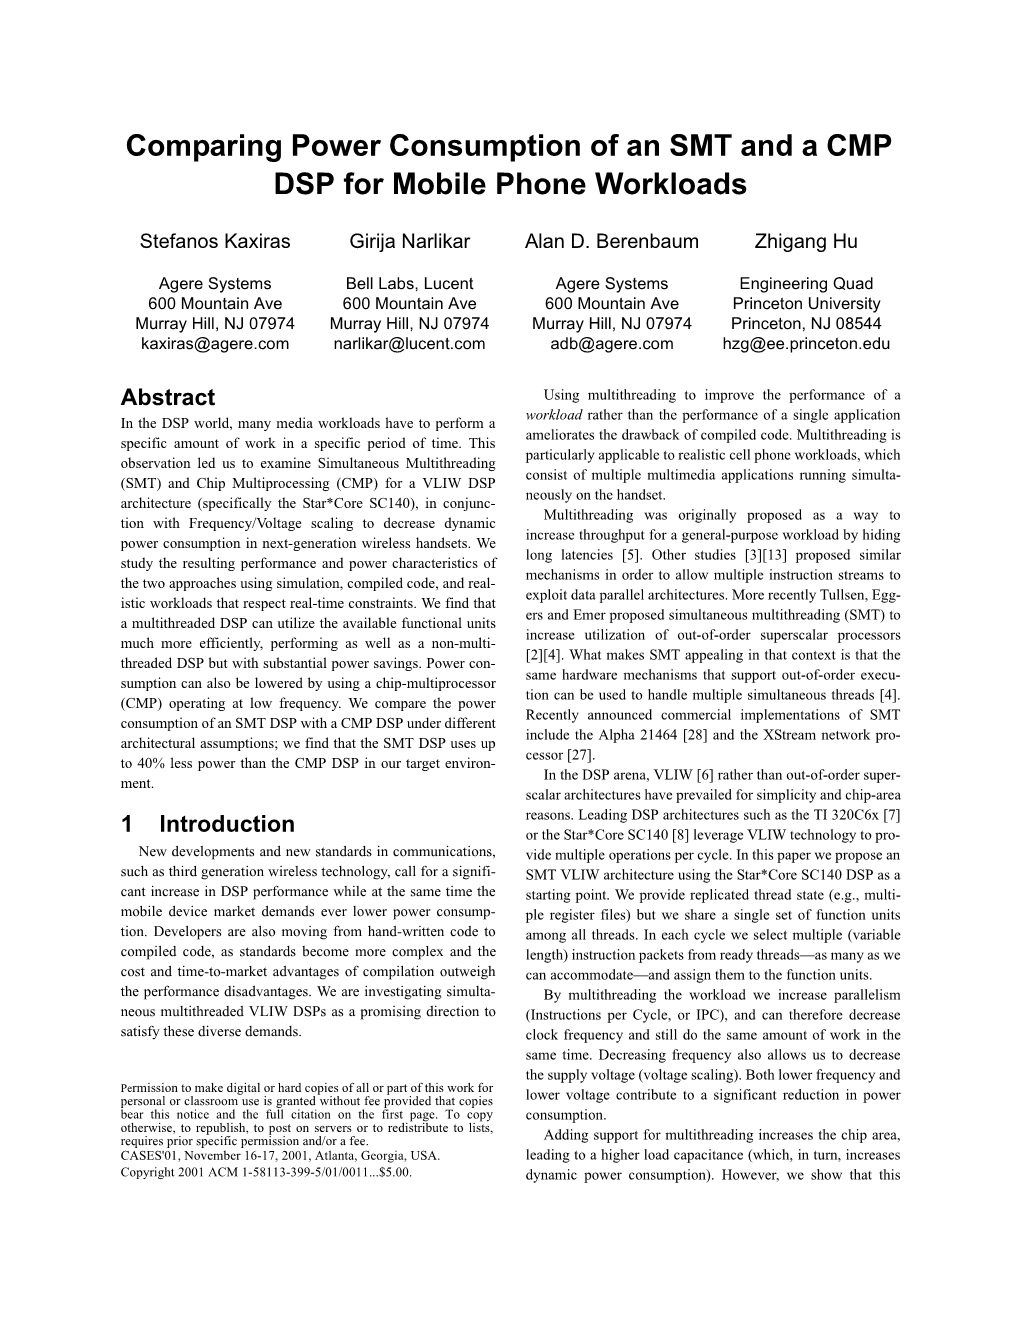 Comparing Power Consumption of an SMT and a CMP DSP for Mobile Phone Workloads